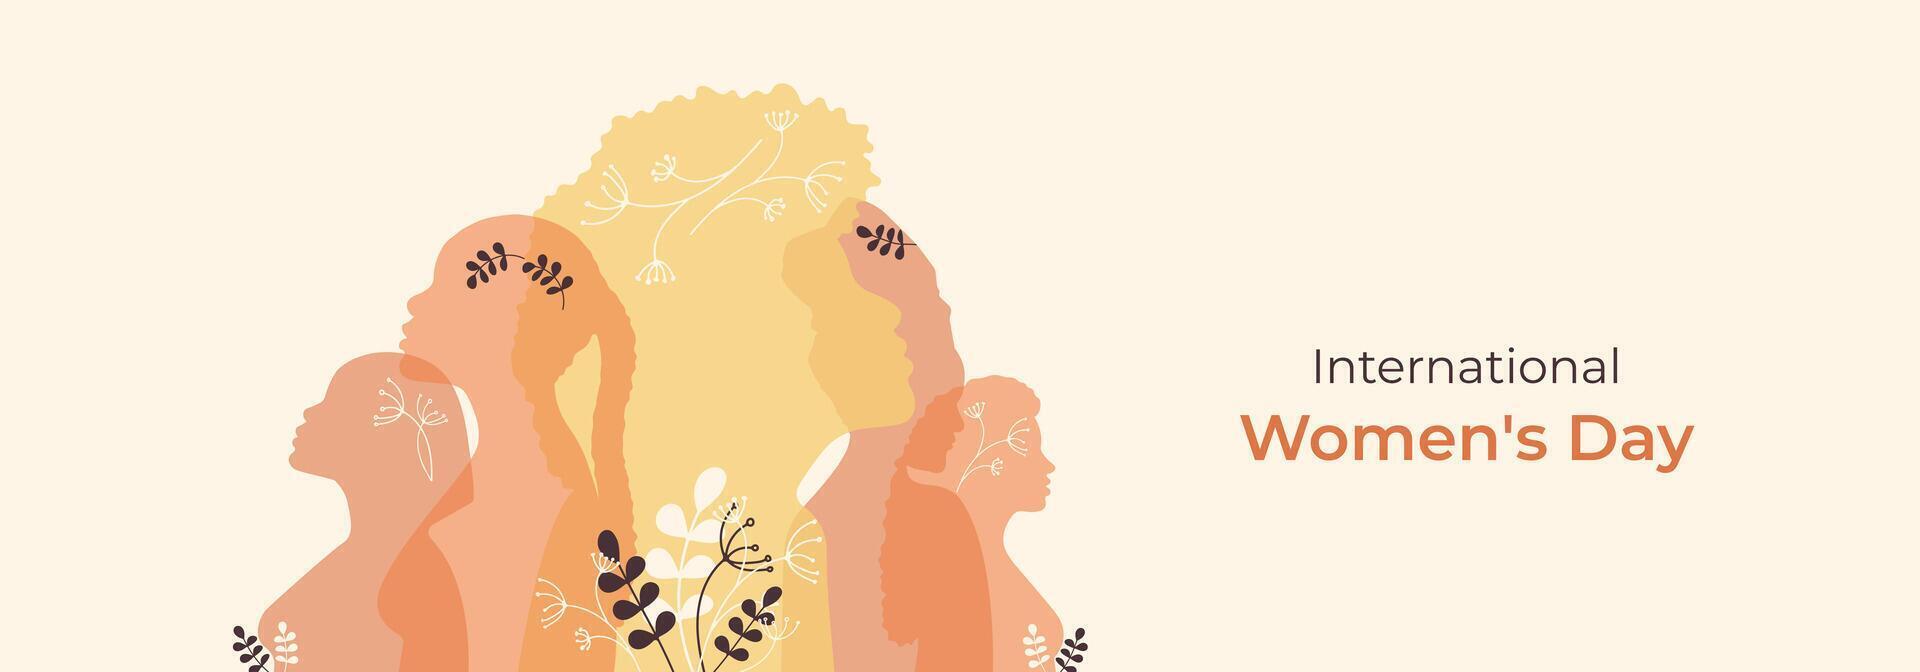 International Womens Day banner. Ladyes of different ethnicities stand side by side together. Diversity people concept. vector